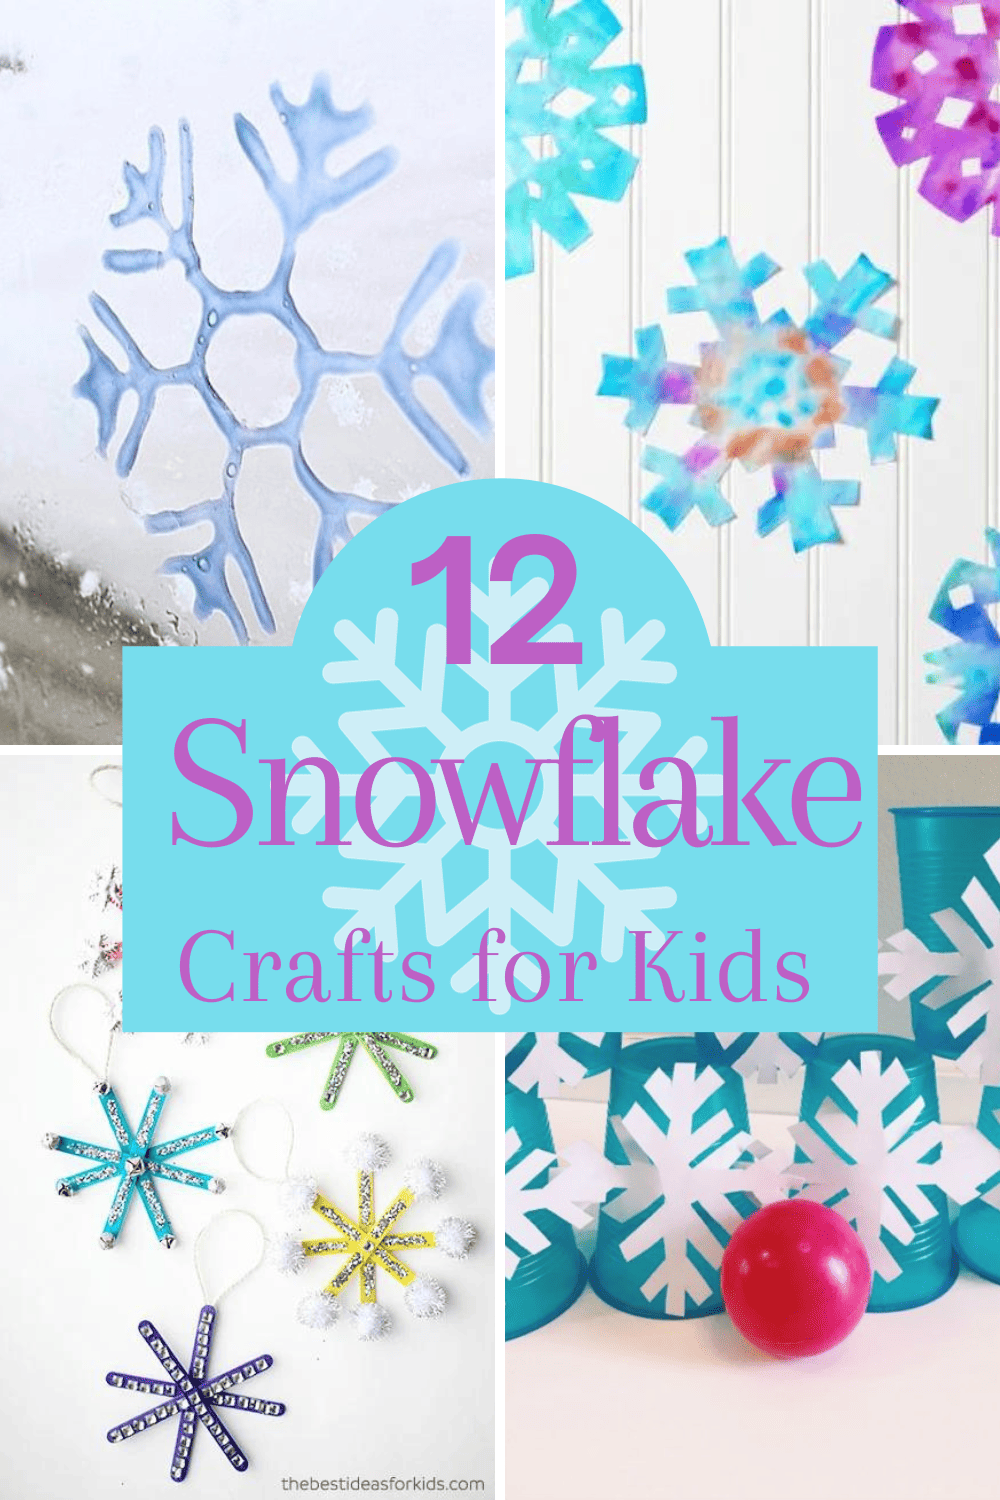 Snowflake crafts for kids - Gift of Curiosity